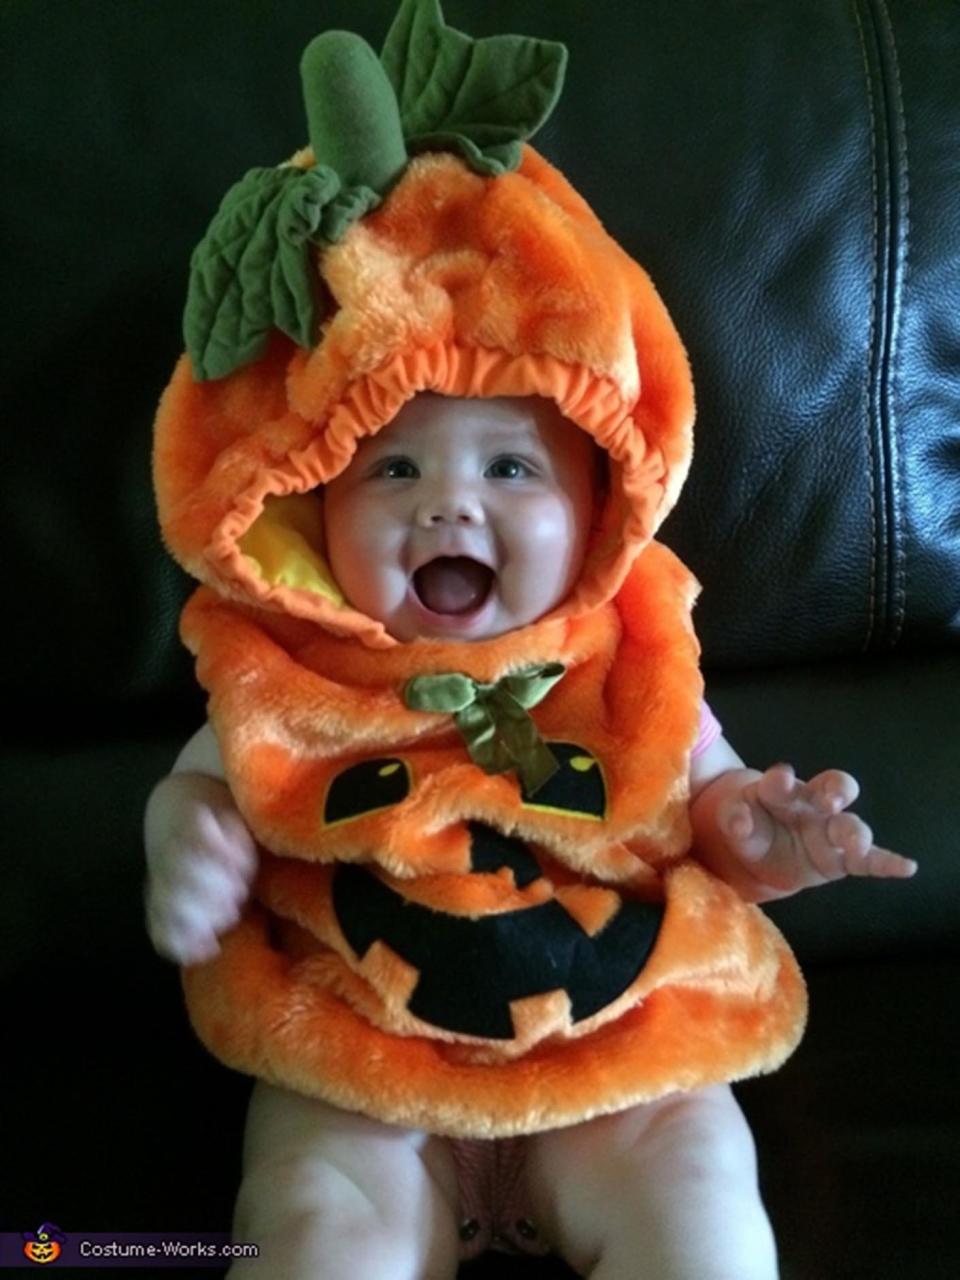 Via <a href="http://www.costume-works.com/costumes_for_babies/punkin.html" target="_blank">Costume Works</a>